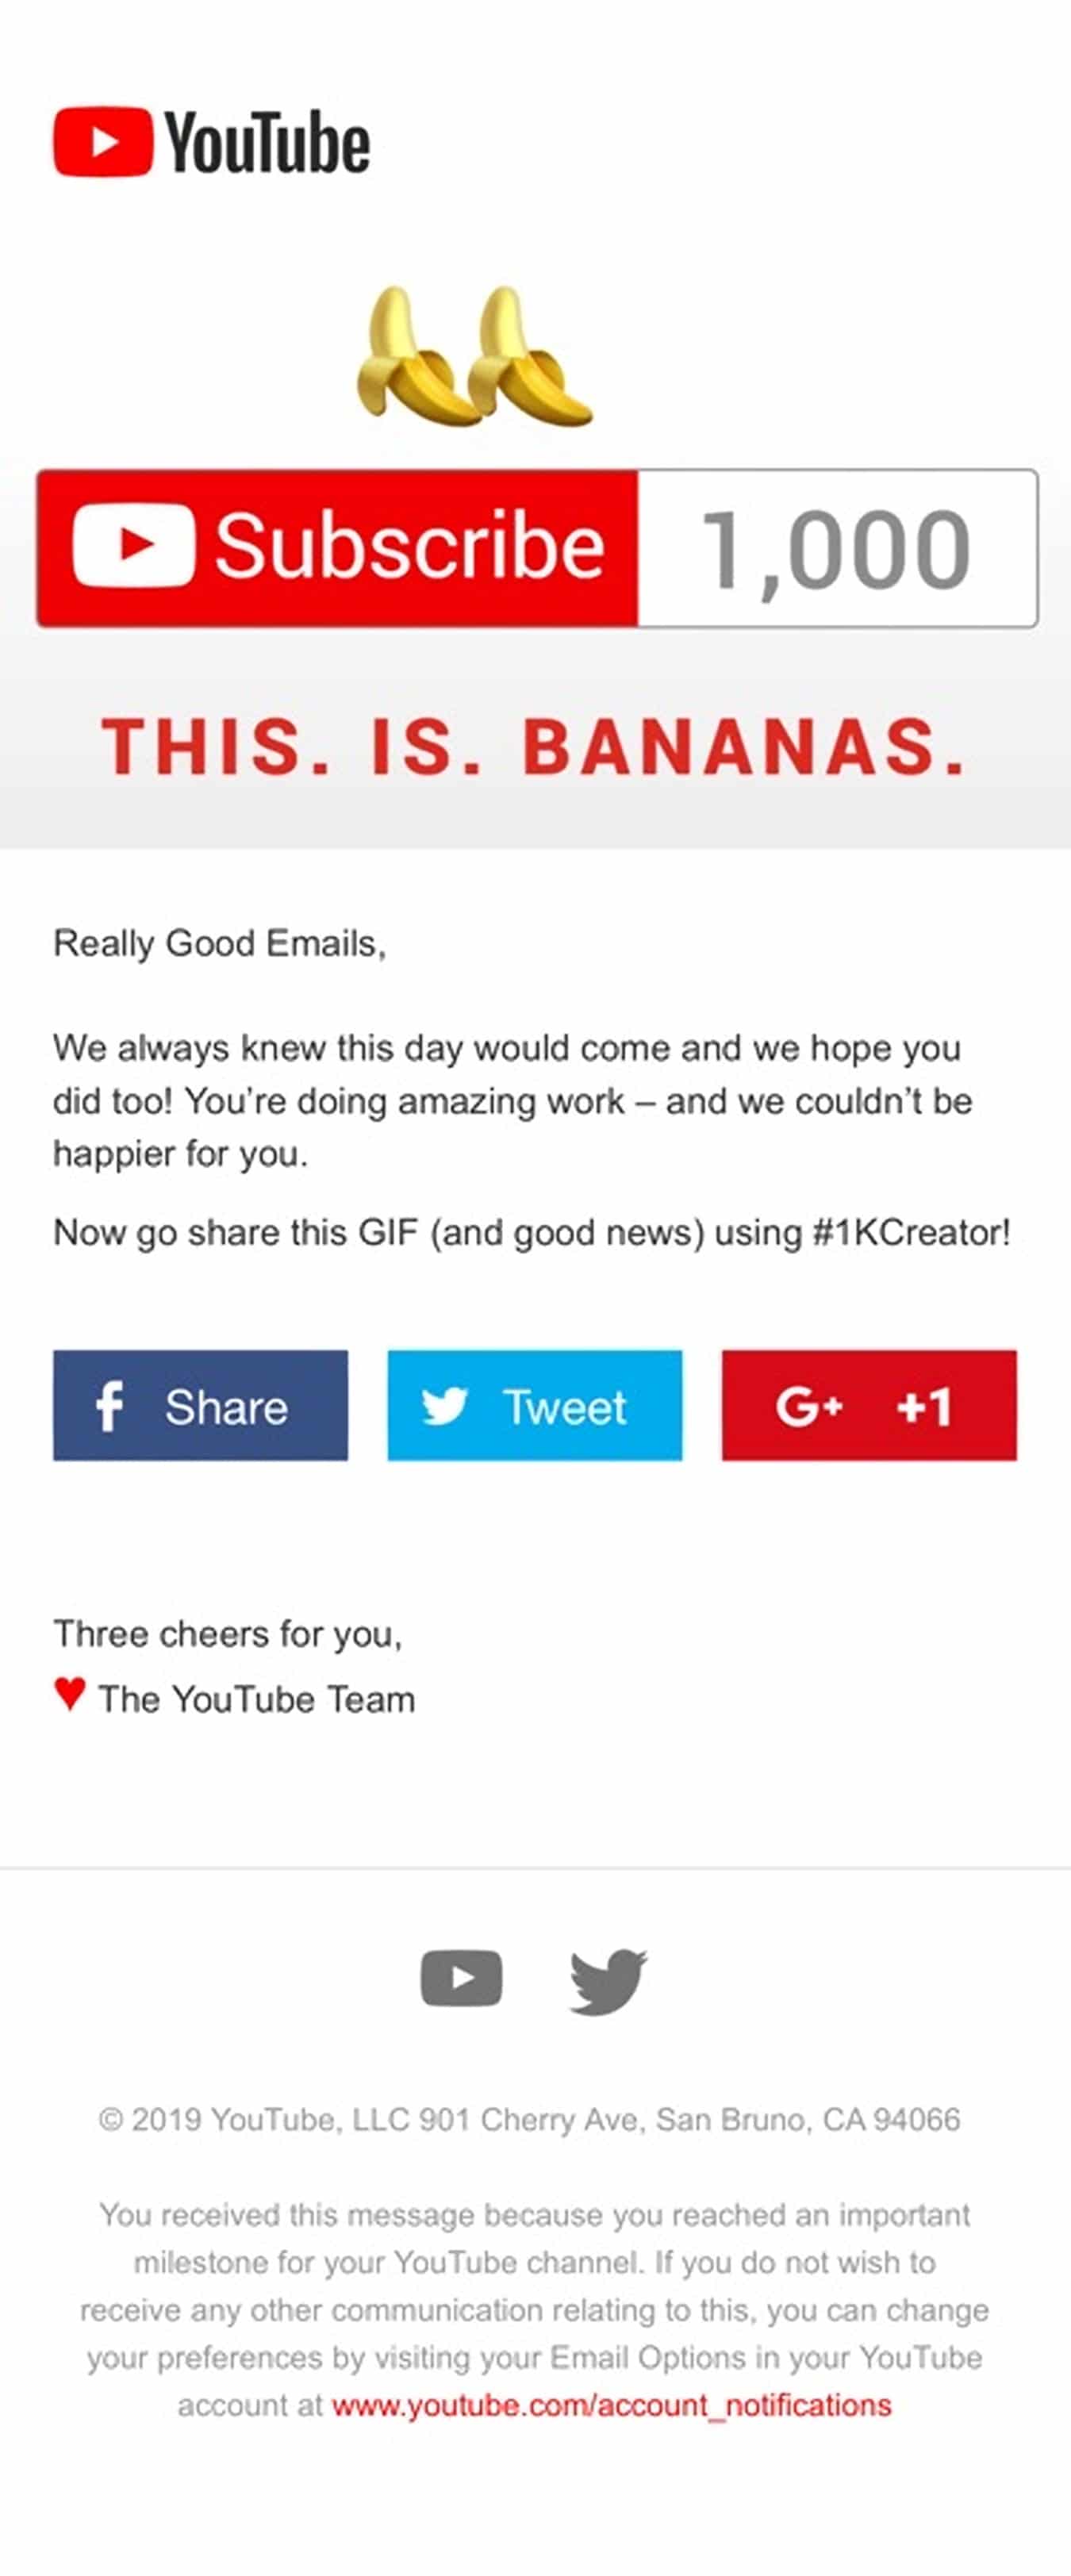 Using GIFs is a great way to include animation in your email as opposed to a full video.